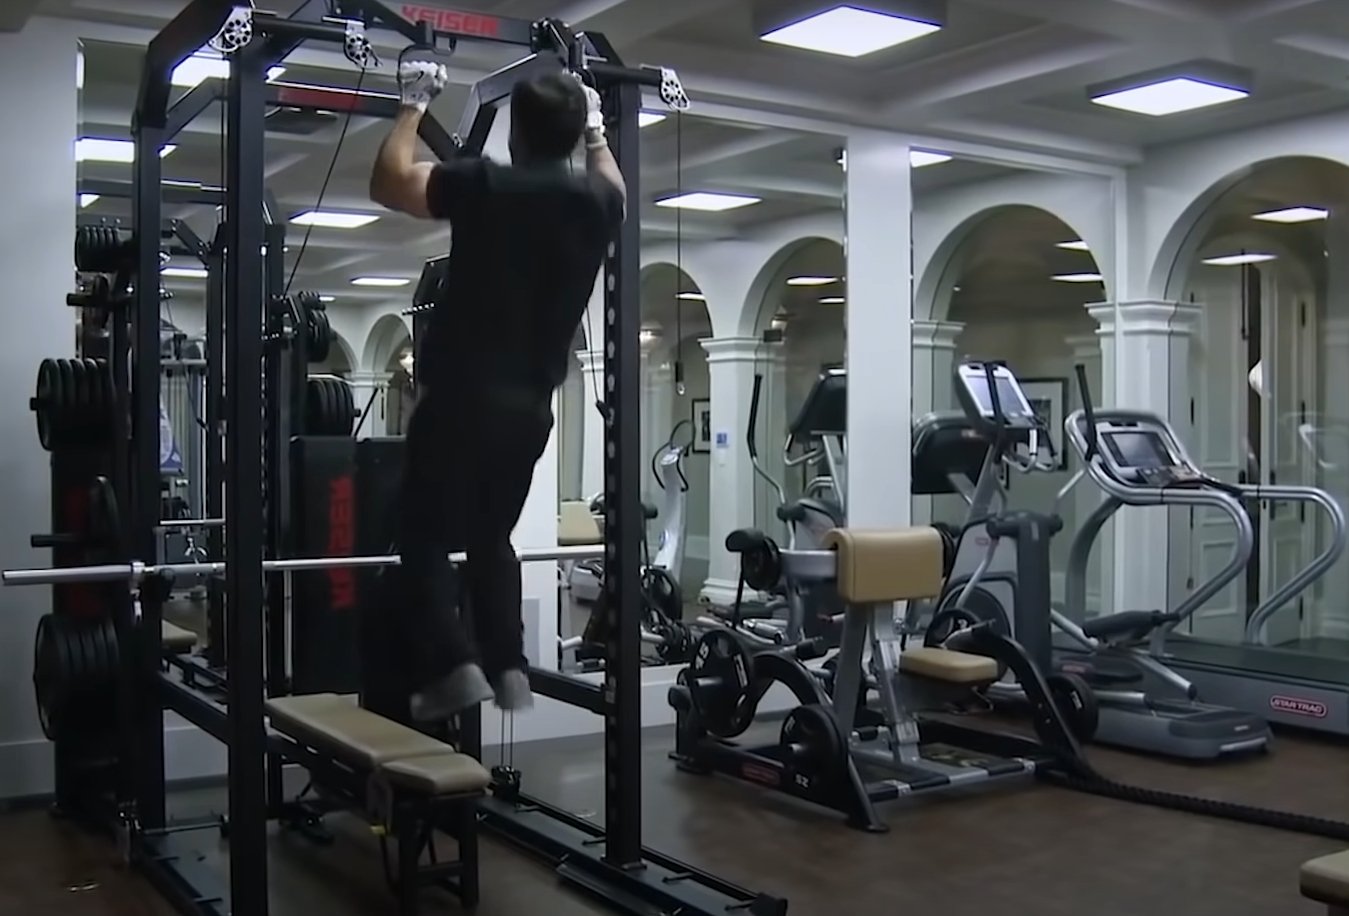 Pictured: Actor Mark Wahlberg working out in his fully equipped gym in his French Manor | Source: YouTube/@MensHealth